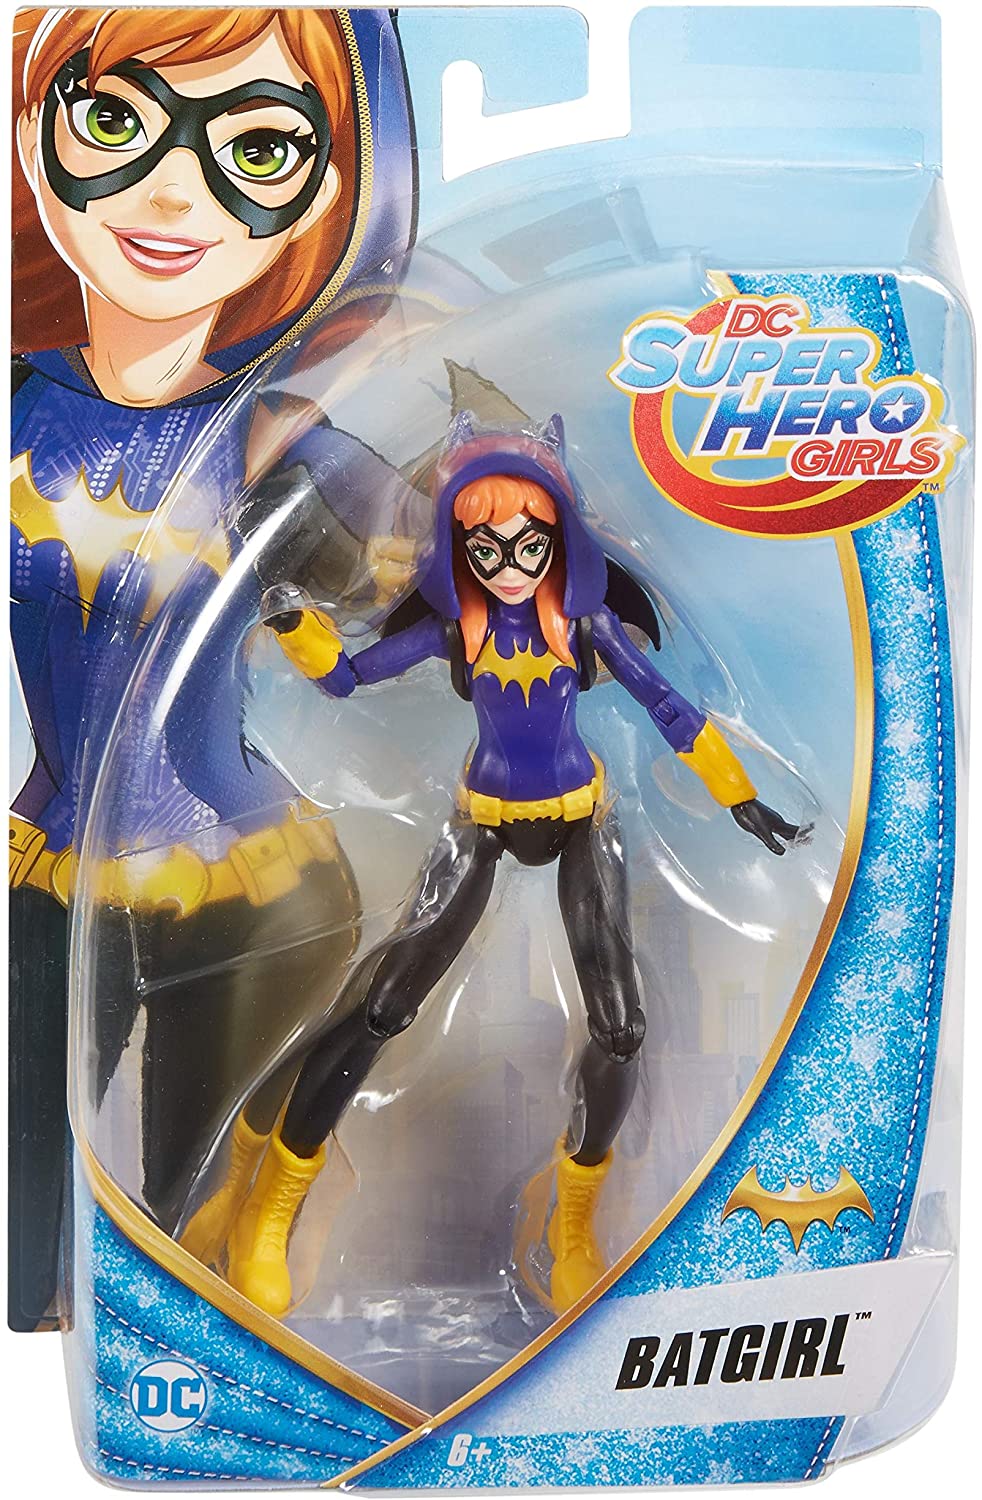 DC Super Hero Girls Batgirl 6" Action Figure -  Articulated For powerful Posing - Included Batpack